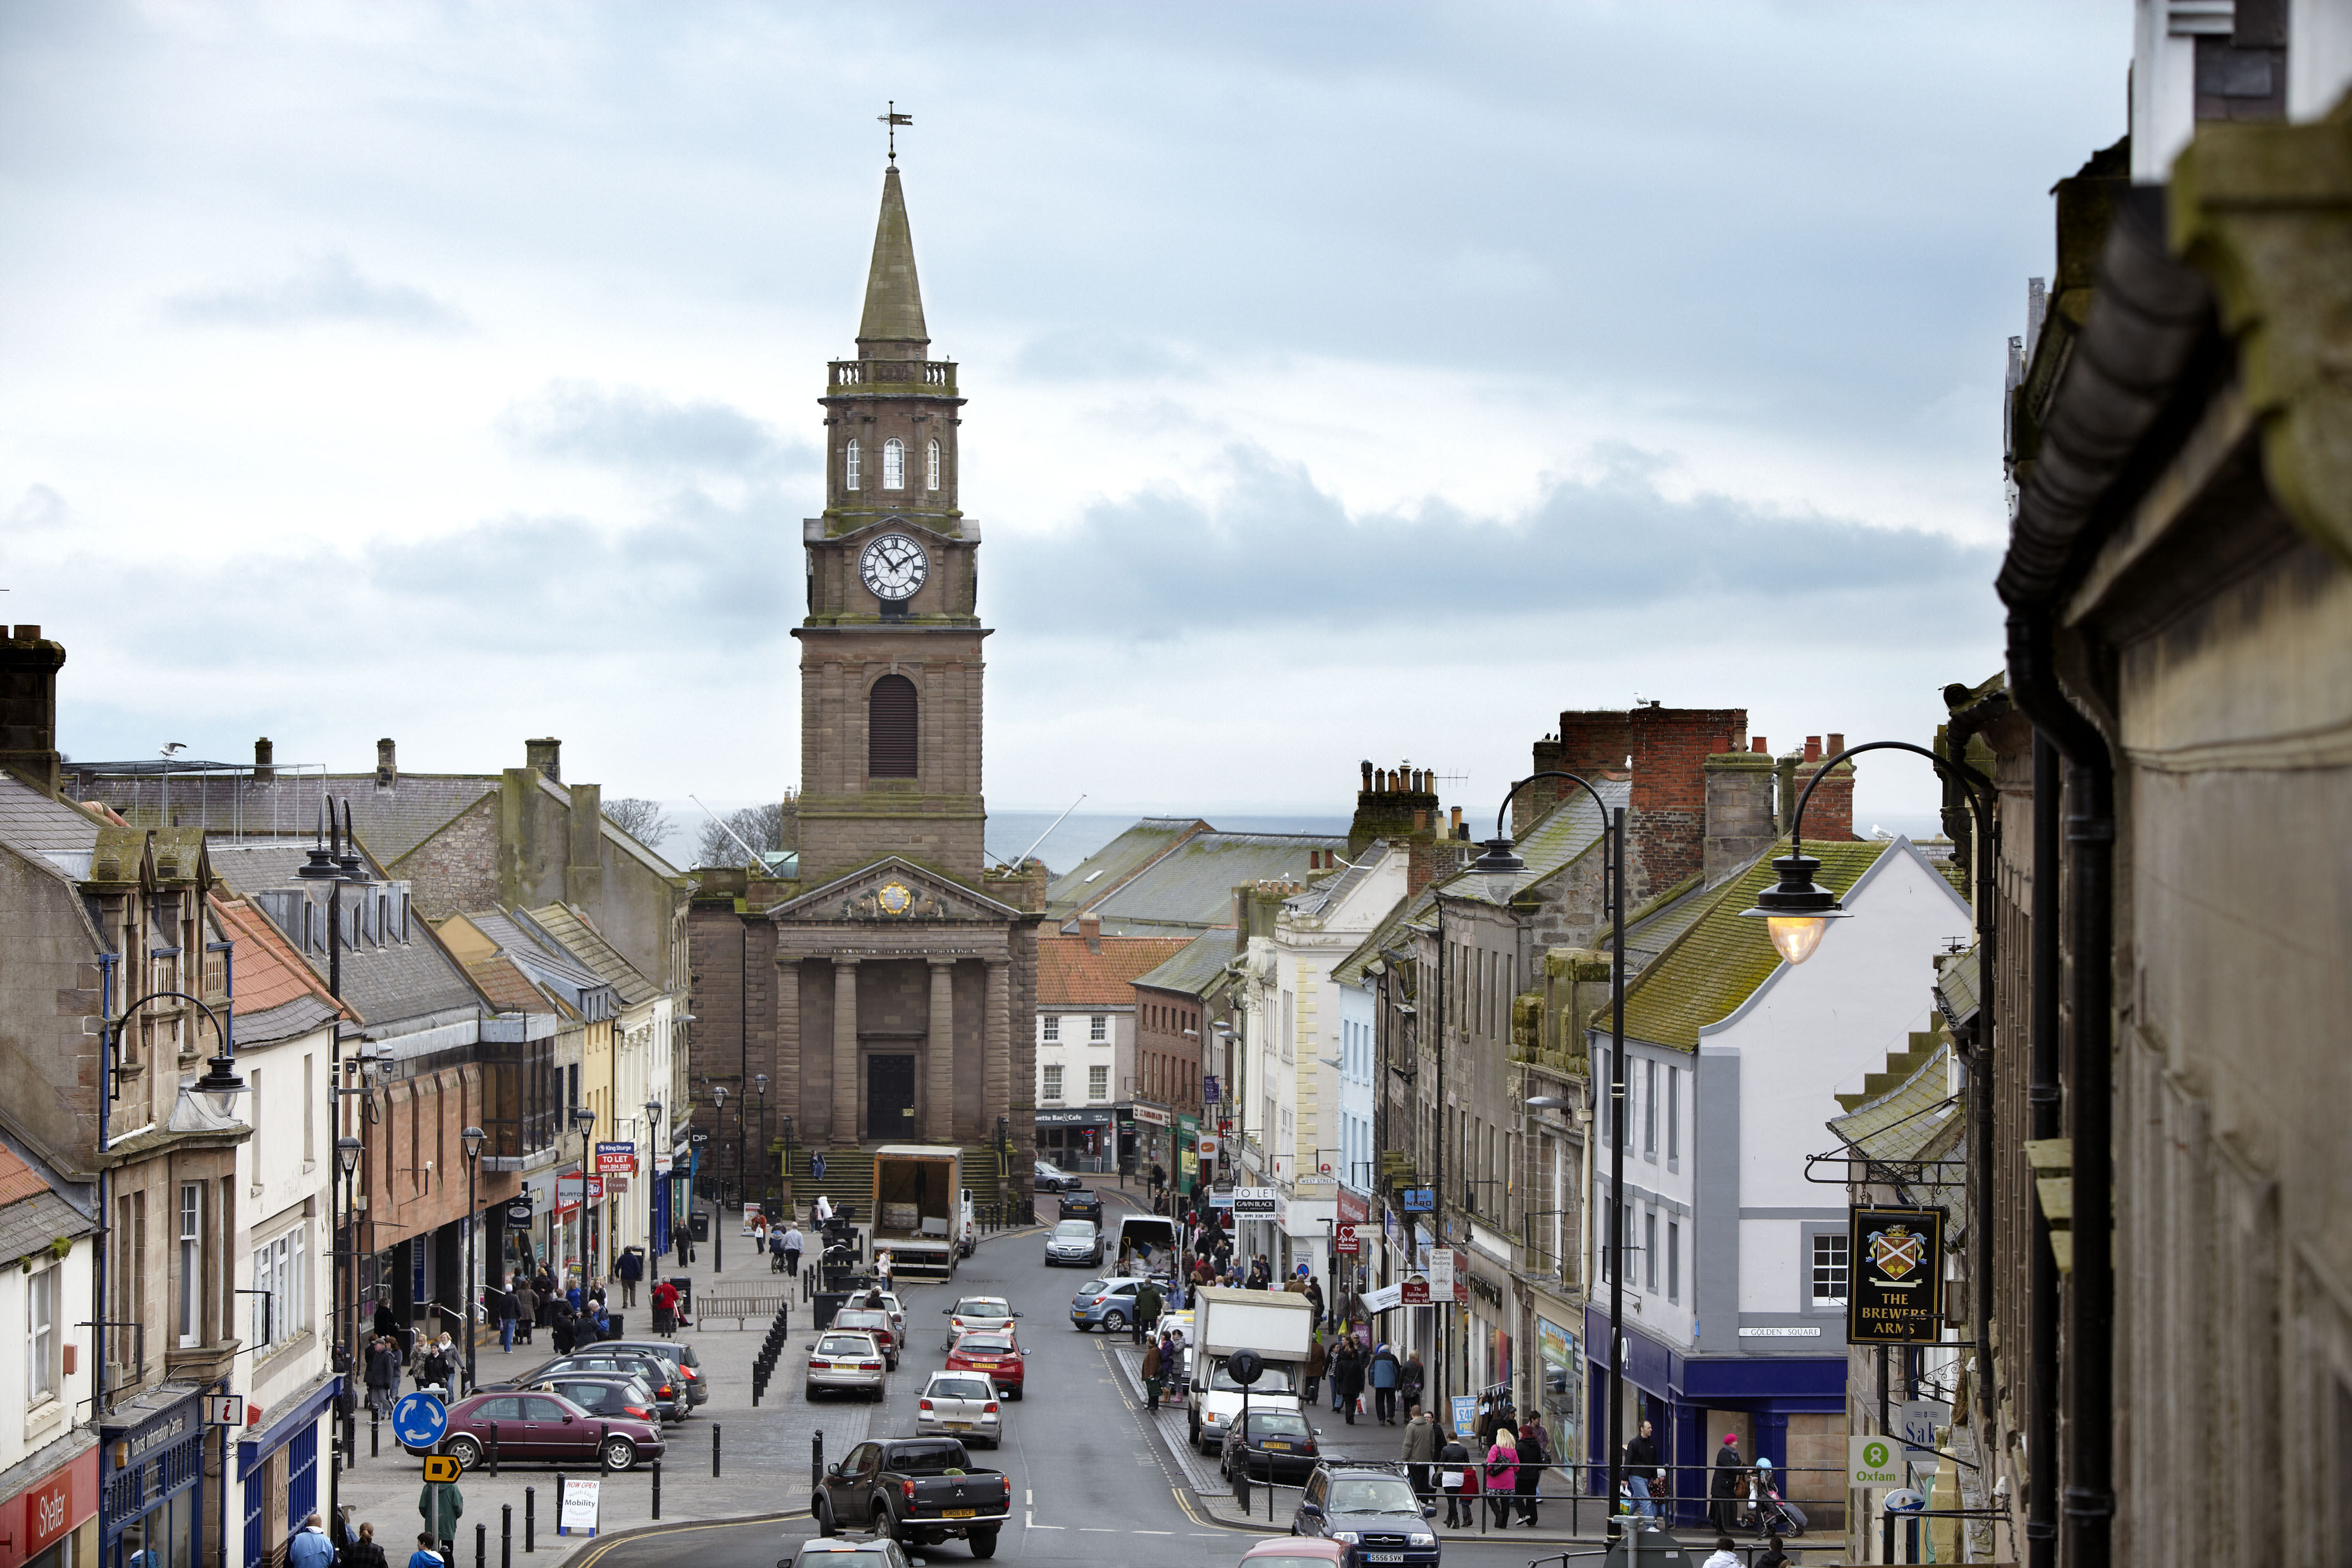 The town of Berwick-upon-Tweed in Northumberland